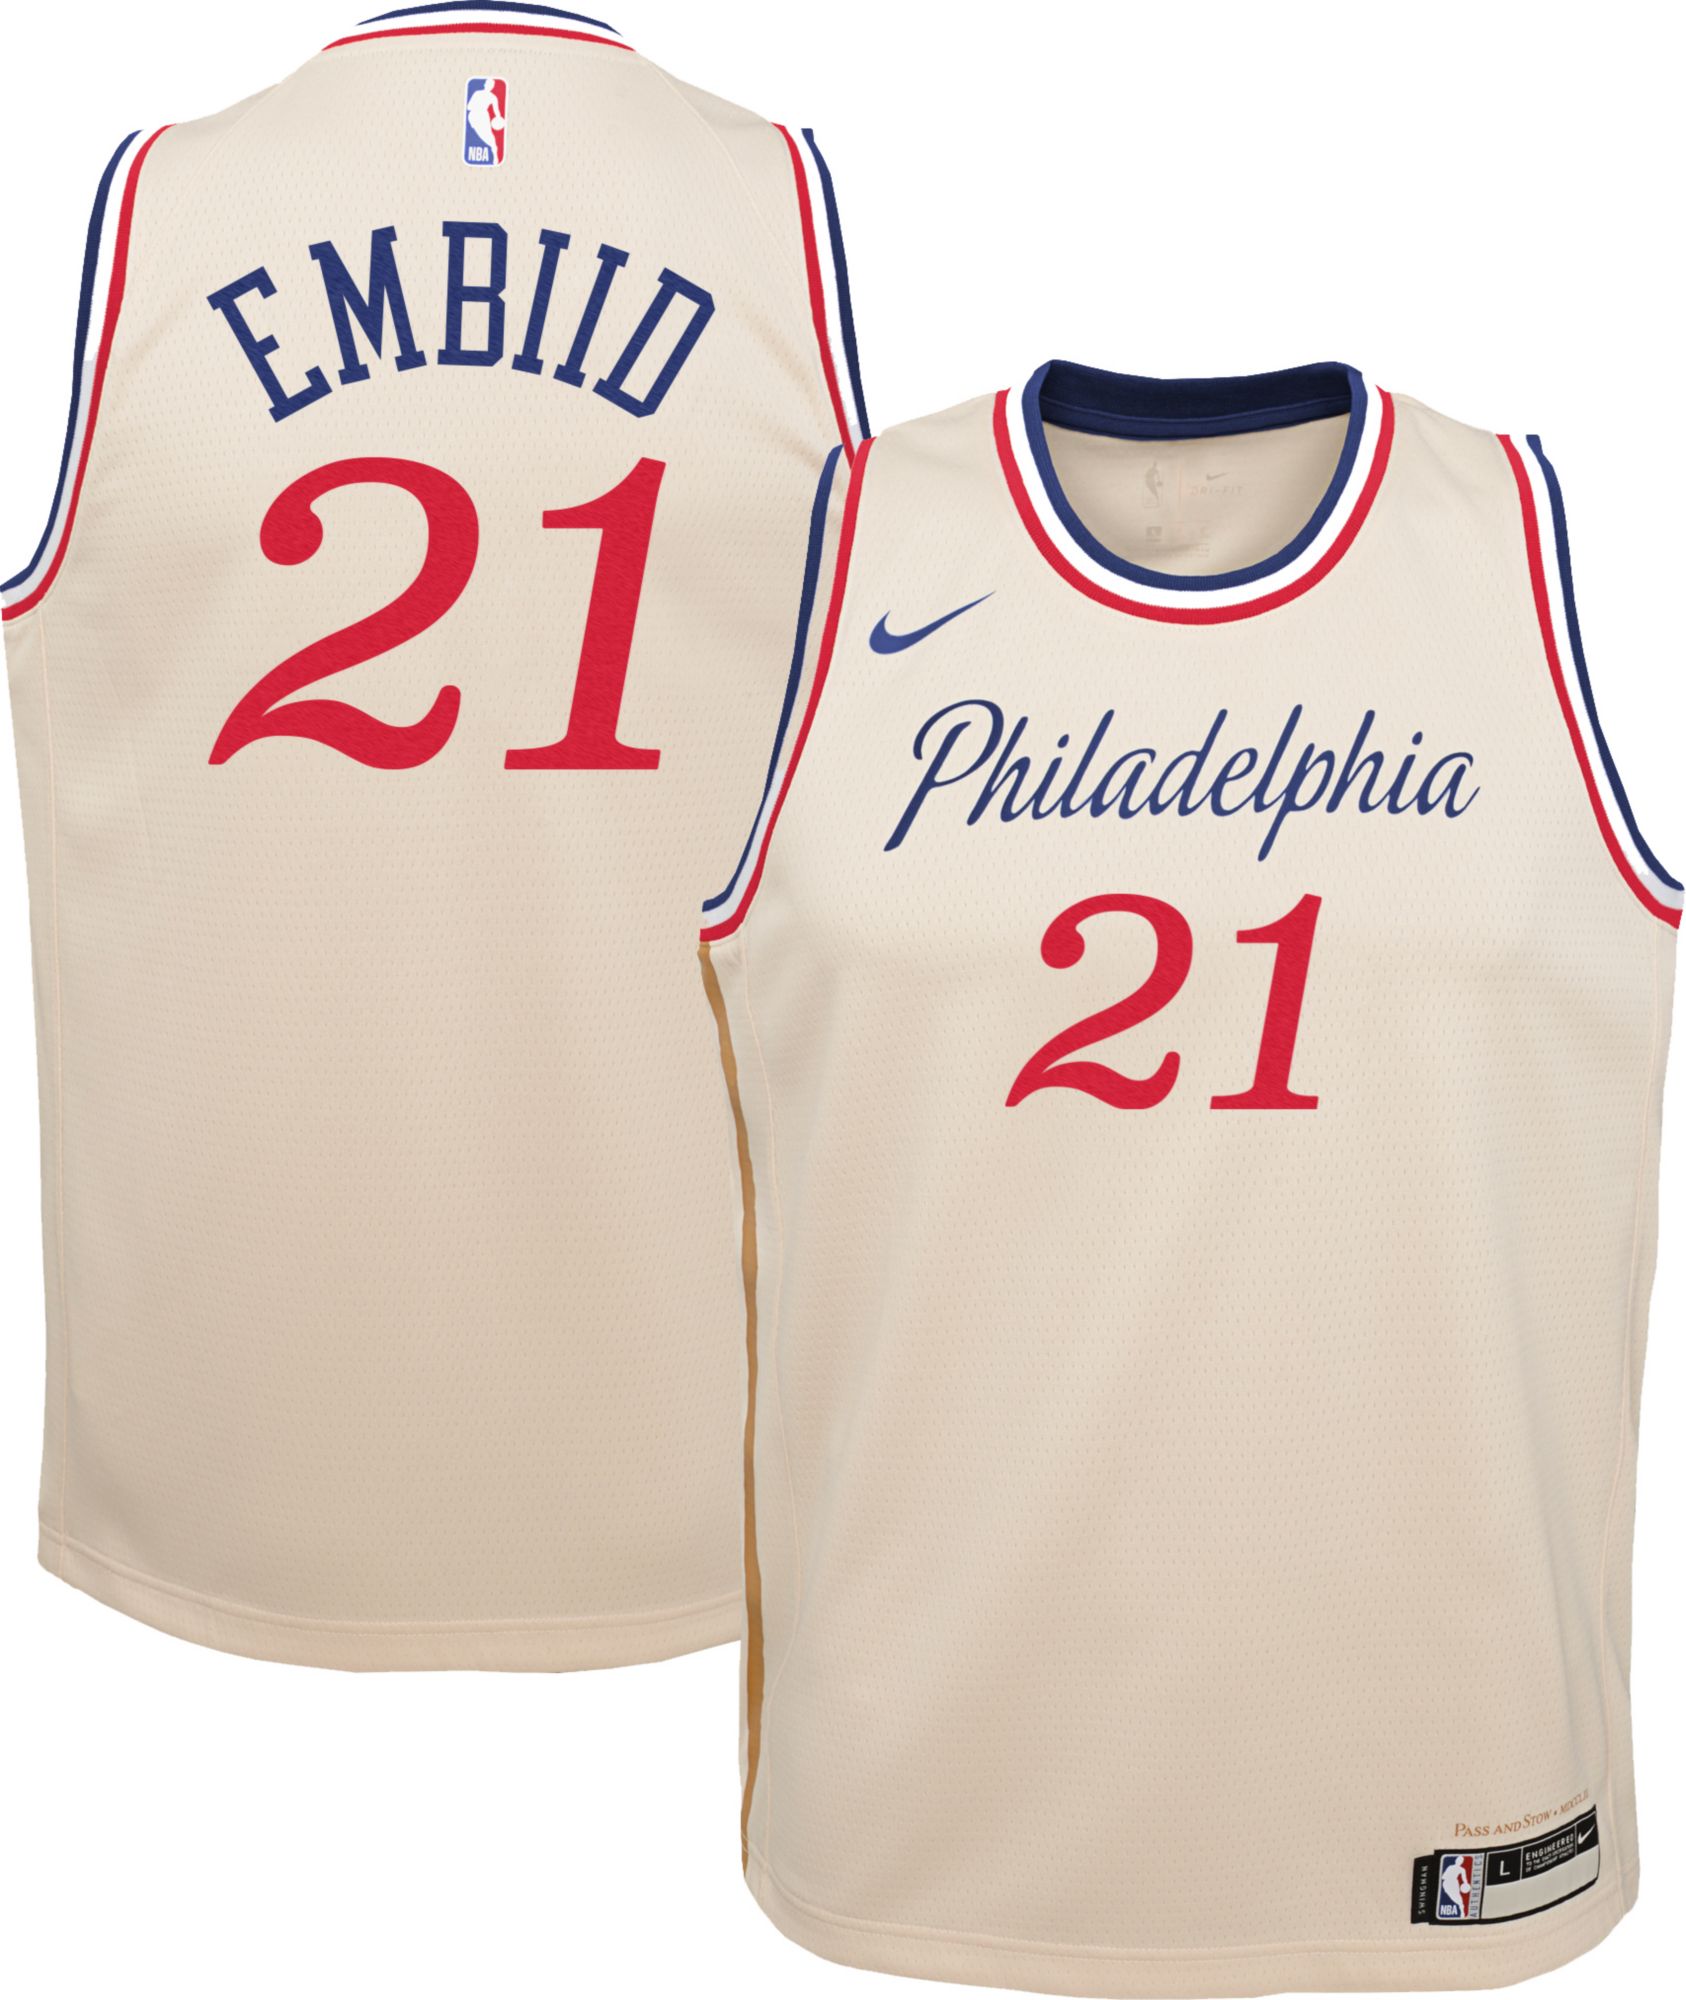 76ers city edition jersey